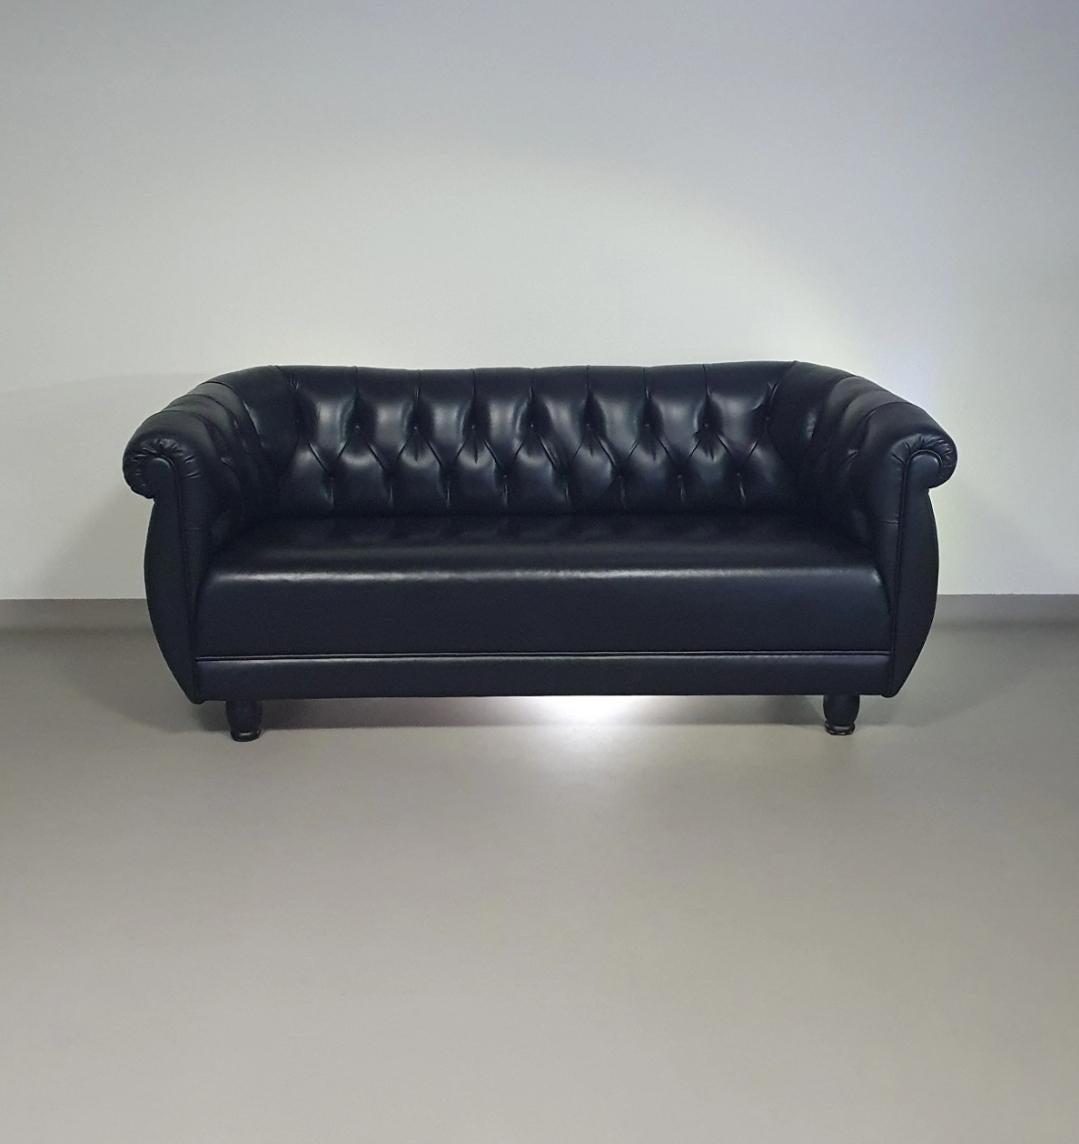 Late 20th Century Black leather sofa by Anna Gili for Mastrangelo  Milan Furniture 1996 For Sale